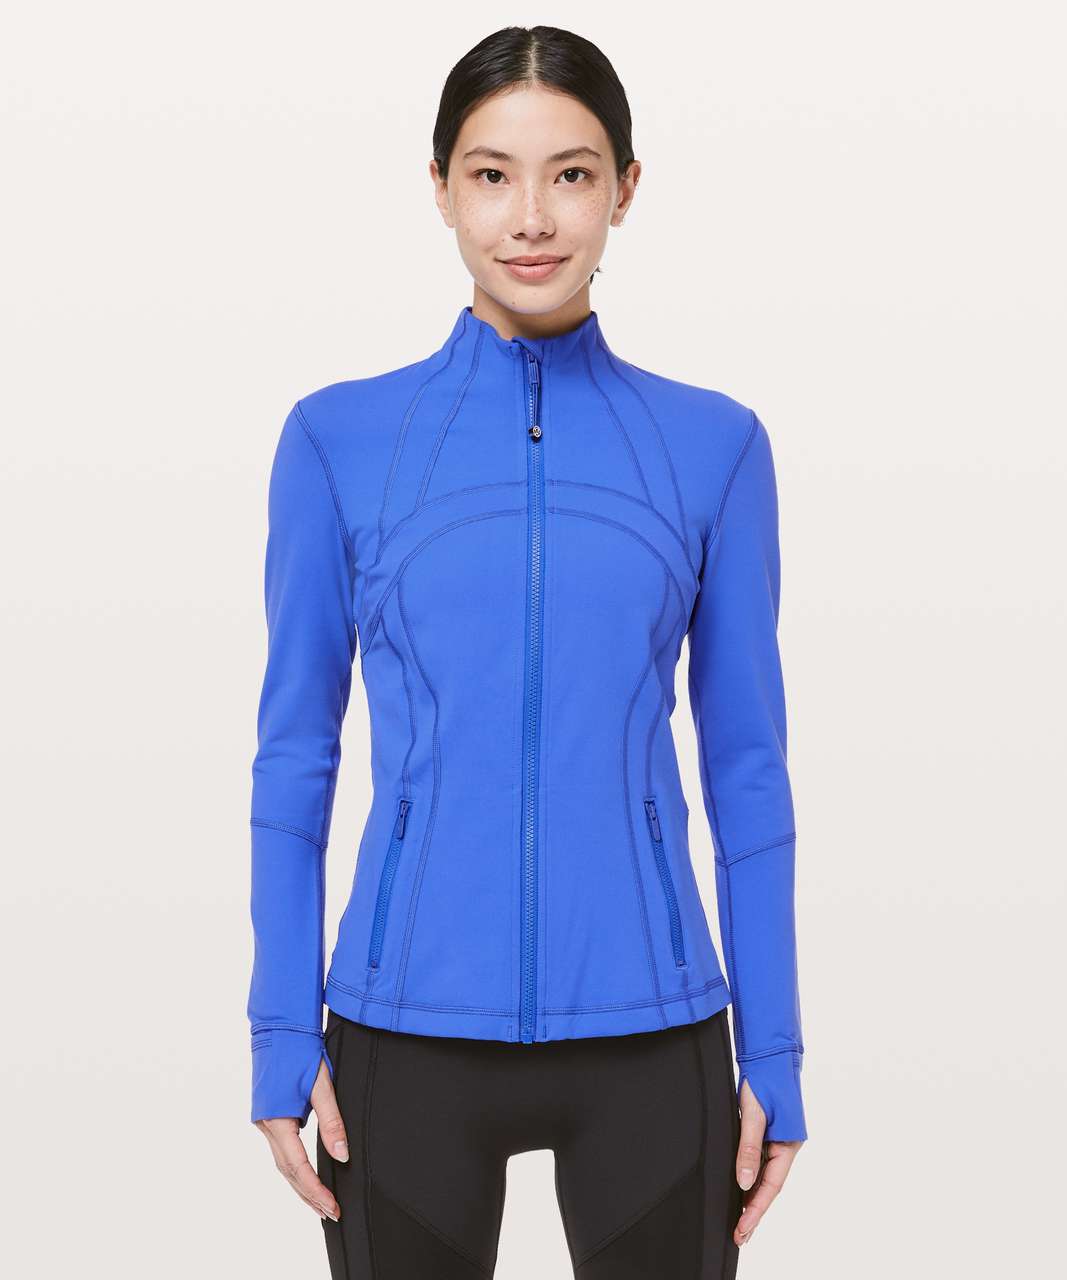 Define jacket size 4 (in blissful blue) and the mini flares in a size 4 as  well : r/lululemon